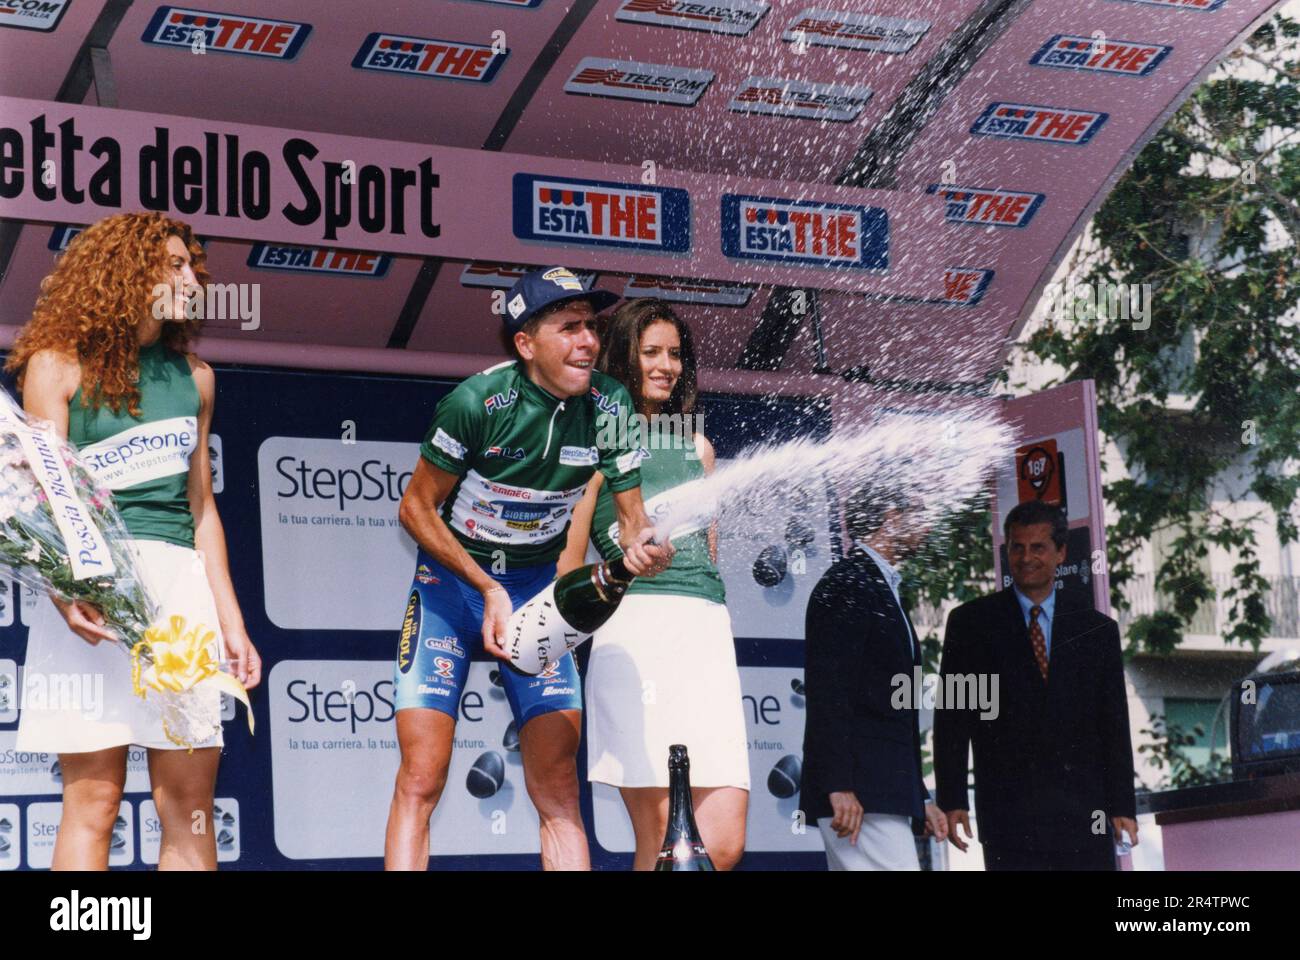 Italian road bicycle racer wins the race, Italy 1990s Stock Photo